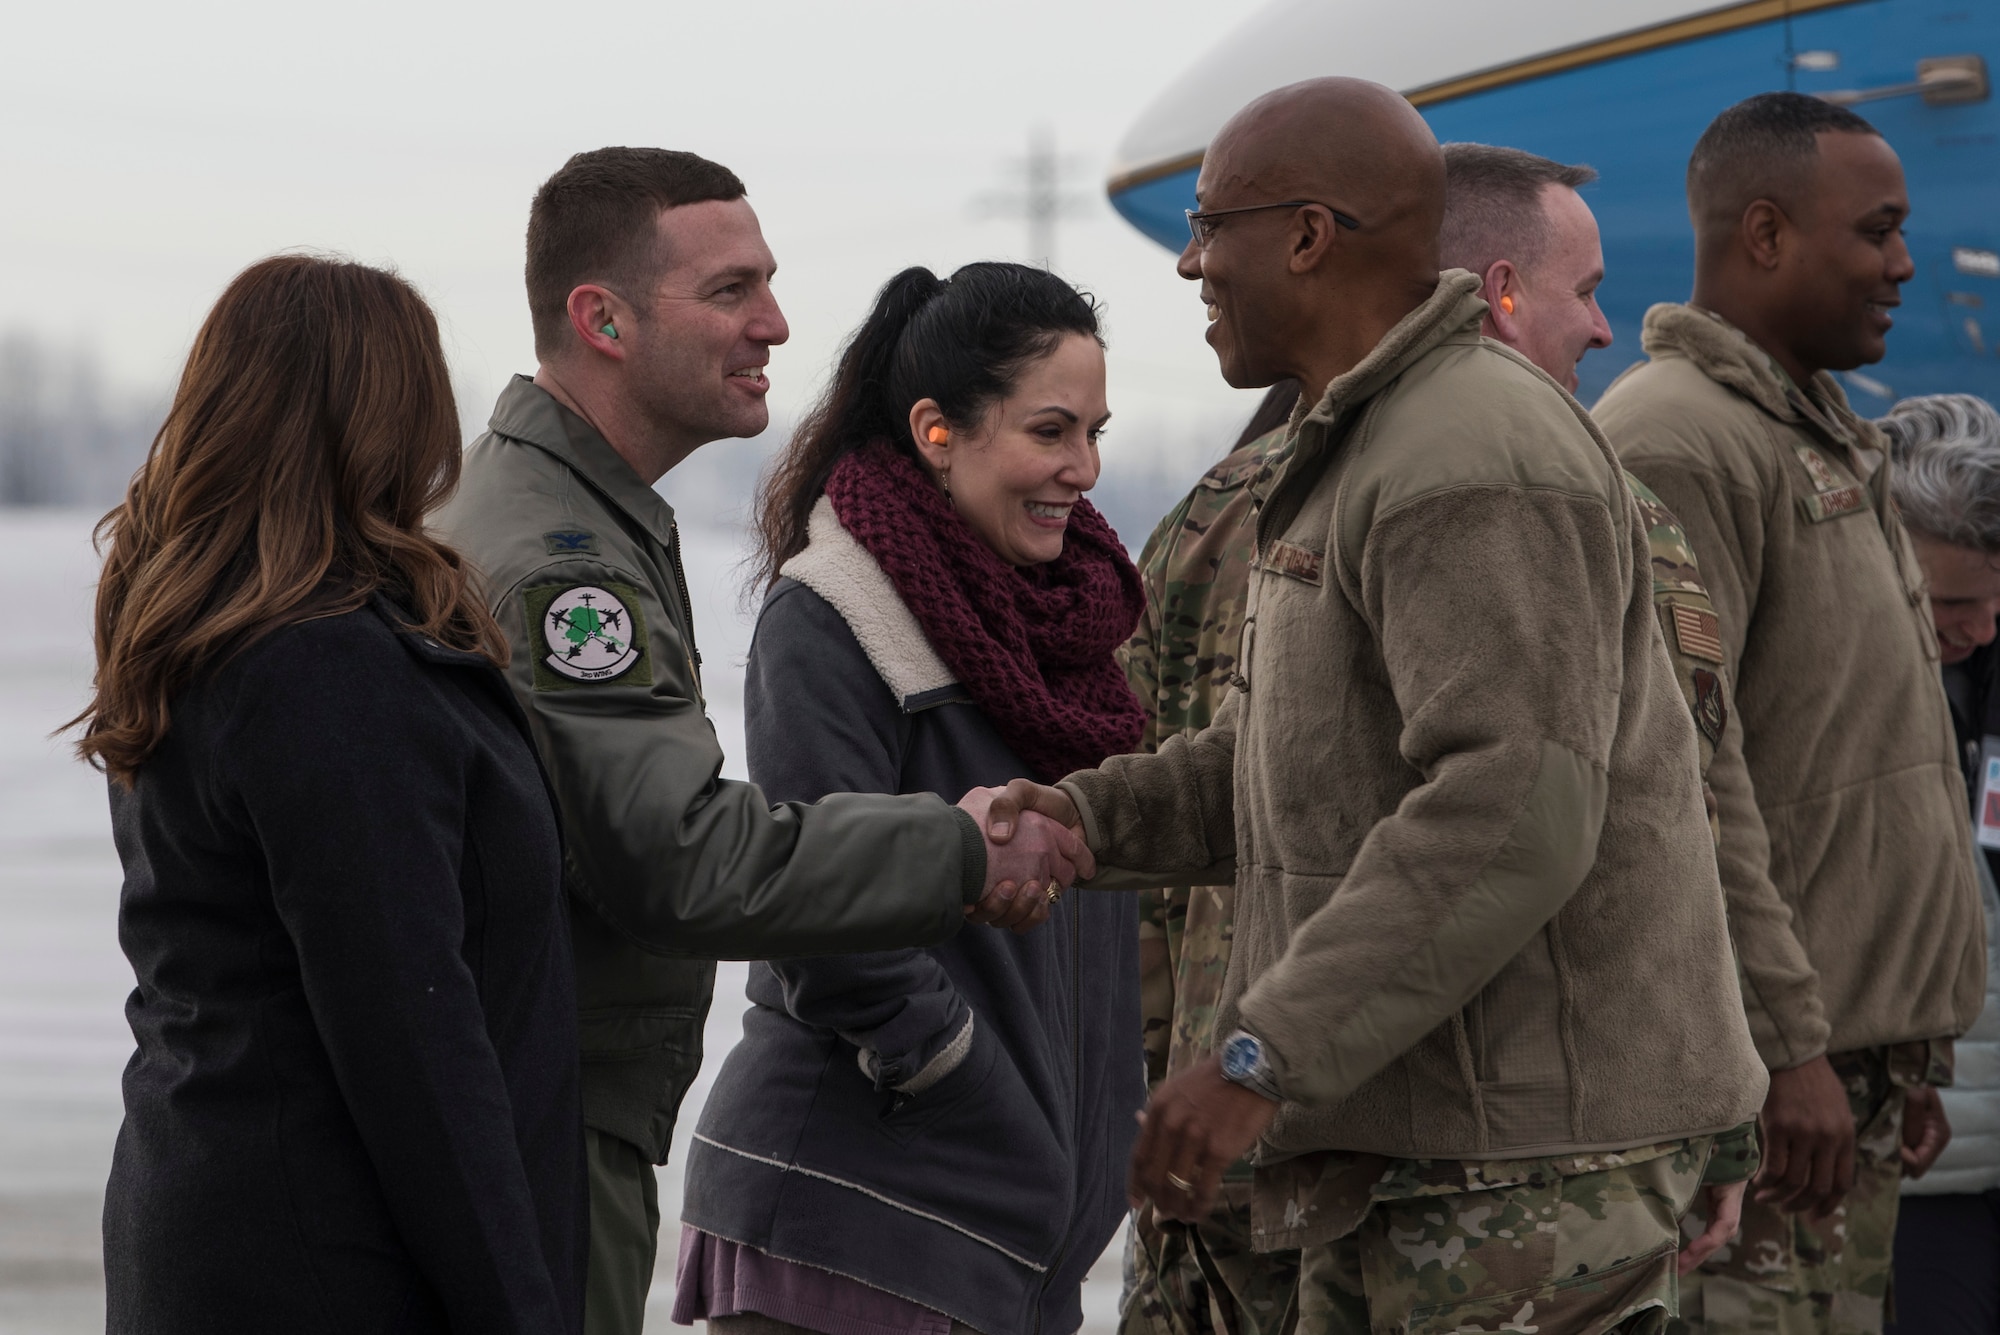 U.S. Air Force Gen. CQ Brown, Jr., Pacific Air Forces (PACAF) commander, shakes hands with Col. Robert Davis, 3rd Wing commander, following his arrival at Joint Base Elmendorf-Richardson (JBER), Alaska, Feb. 11, 2019. Brown visited JBER to meet with Airmen and to emphasize operational readiness. PACAF leadership toured various facilities throughout the installation to include the air traffic control tower, 517th Airlift Squadron and 962nd Airborne Air Control Squadron.